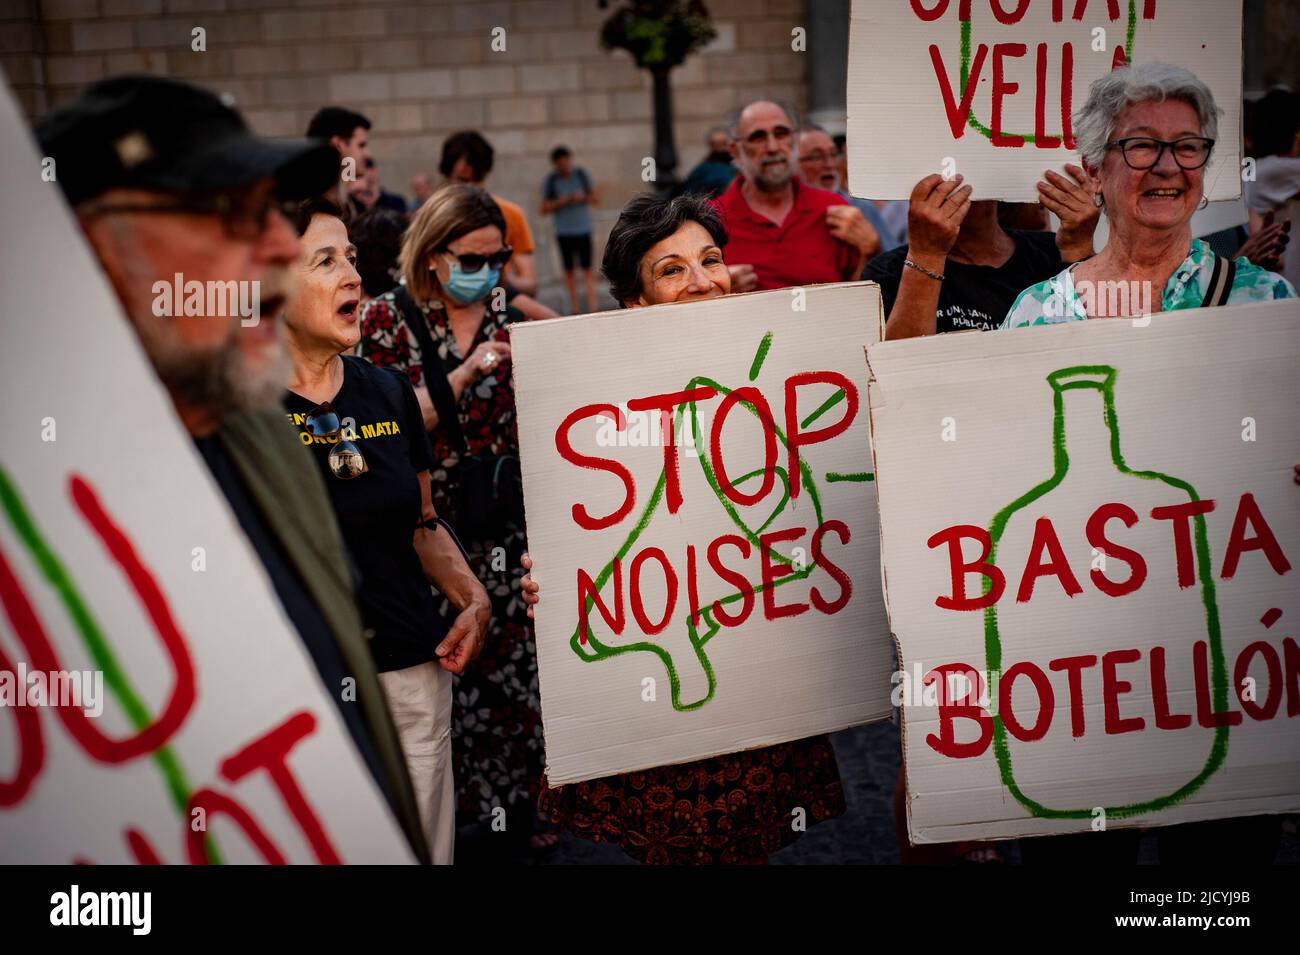 Barcelona residents hold placards reading Stop Noise as they gather to protest against noise pollution affecting nightlife areas and  neighbourhoods under mass tourism influence. Stock Photo